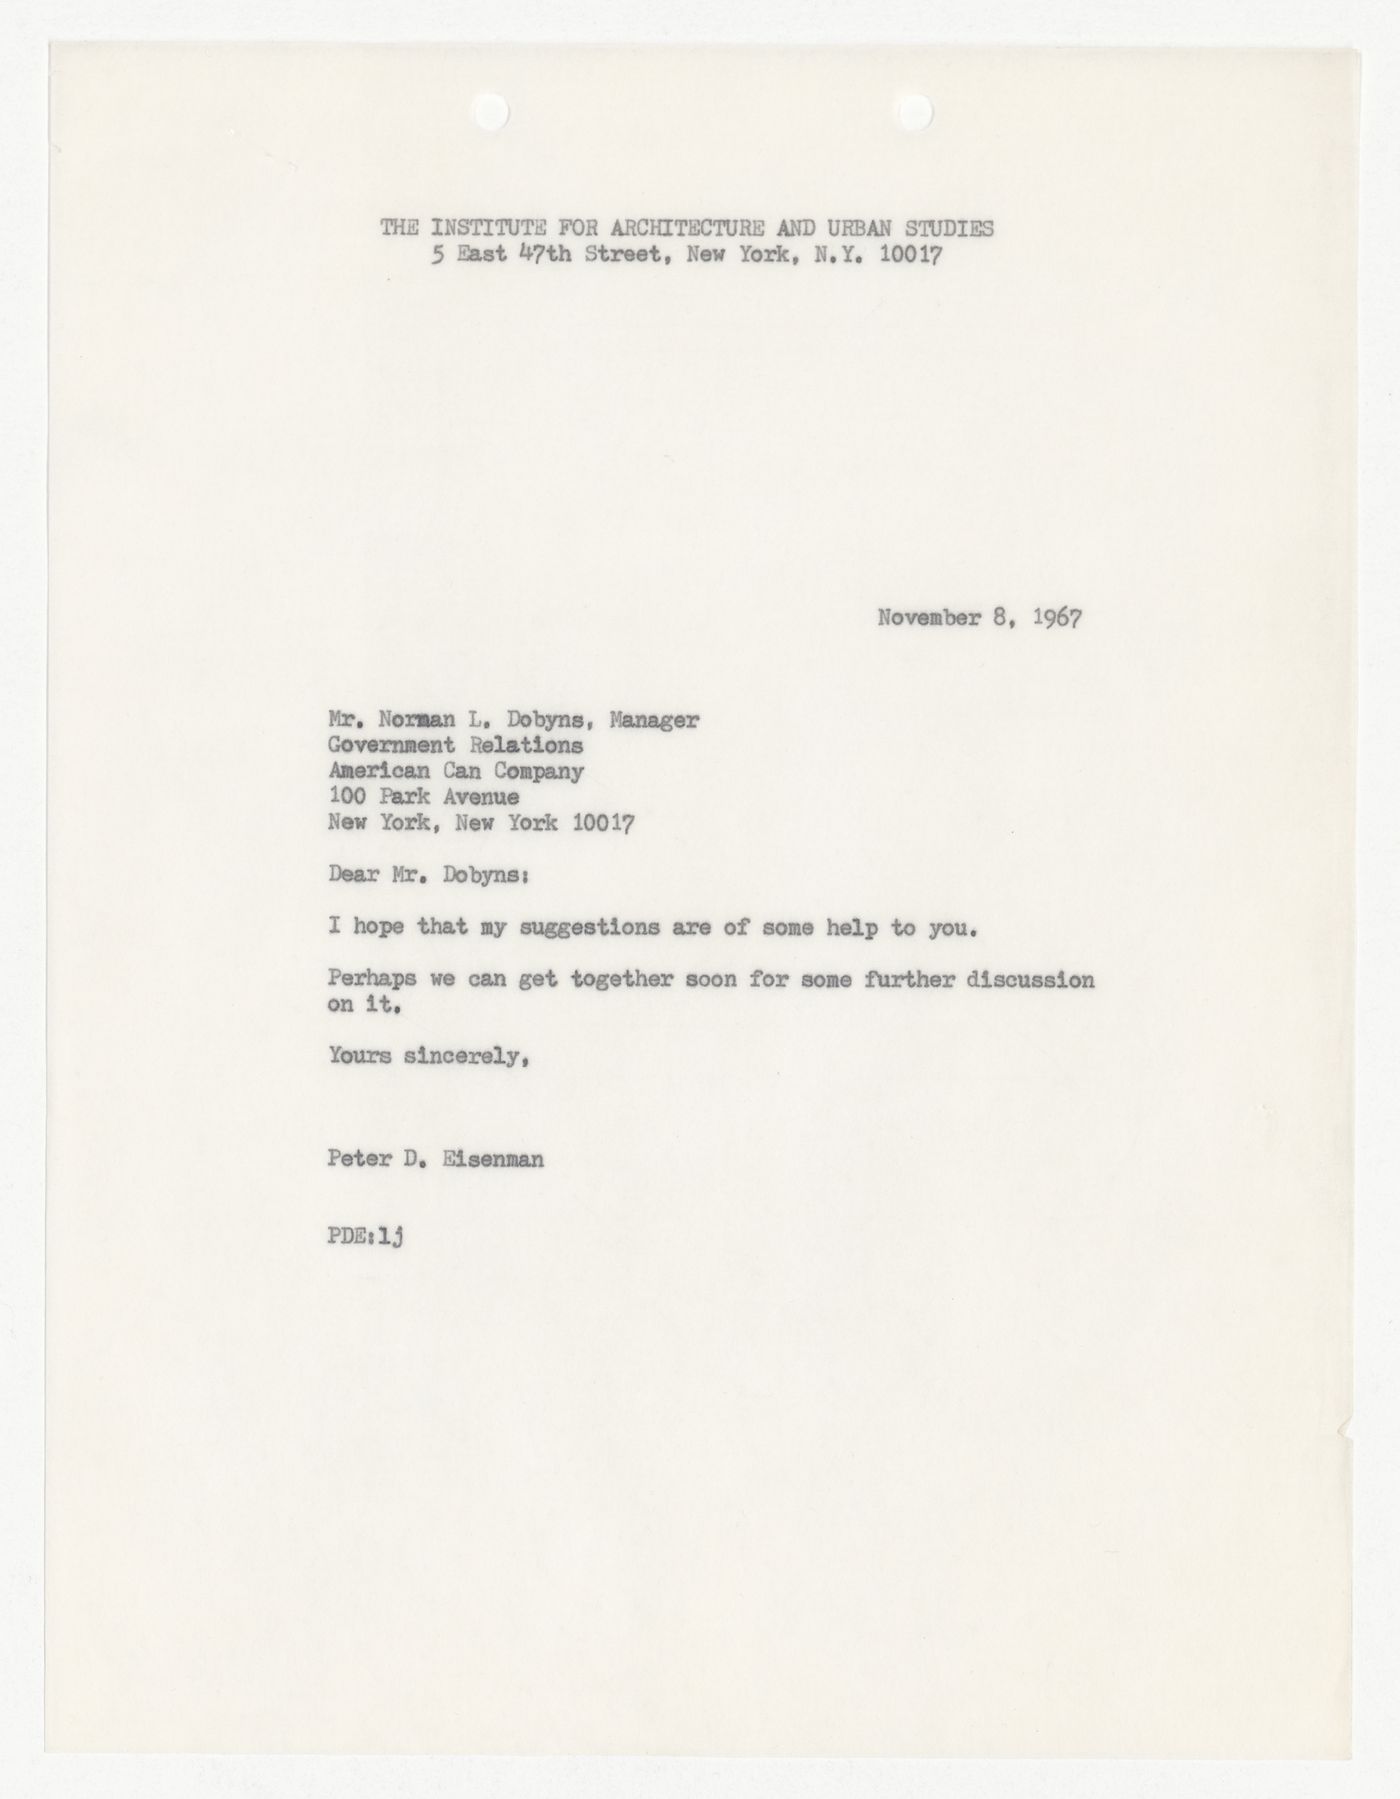 Letter from Peter D. Eisenman to Norman L. Dobyns